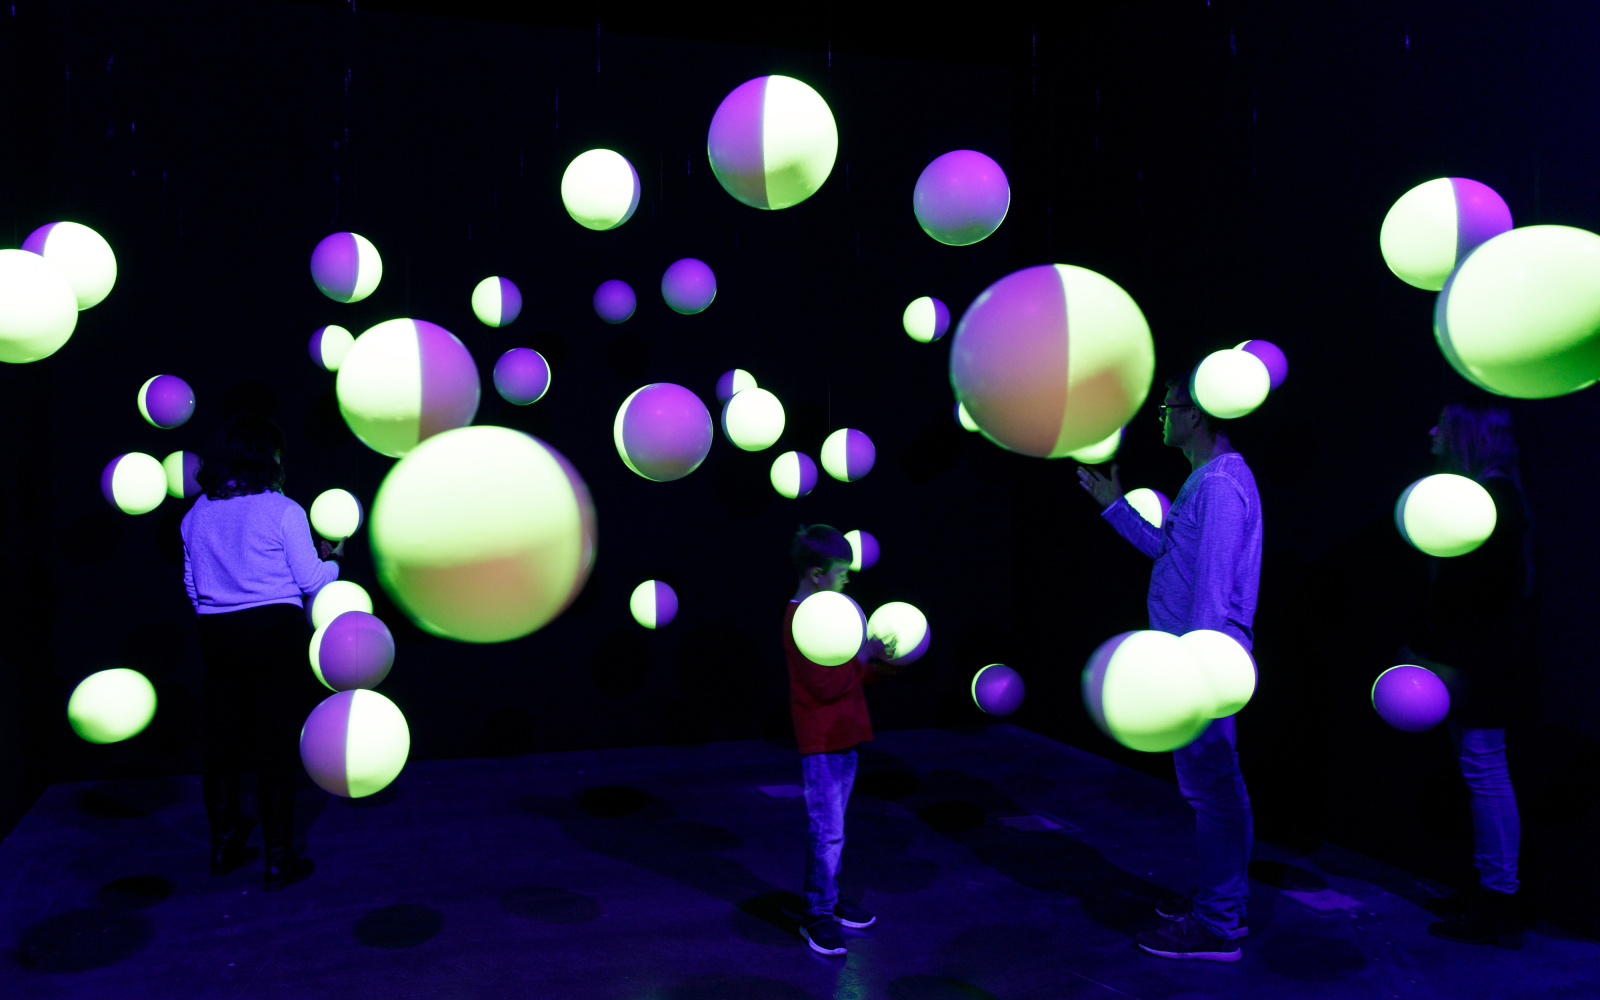 In a dark room, half-fluorescent polystyrene balls hang from the ceiling with which three visitors interact.